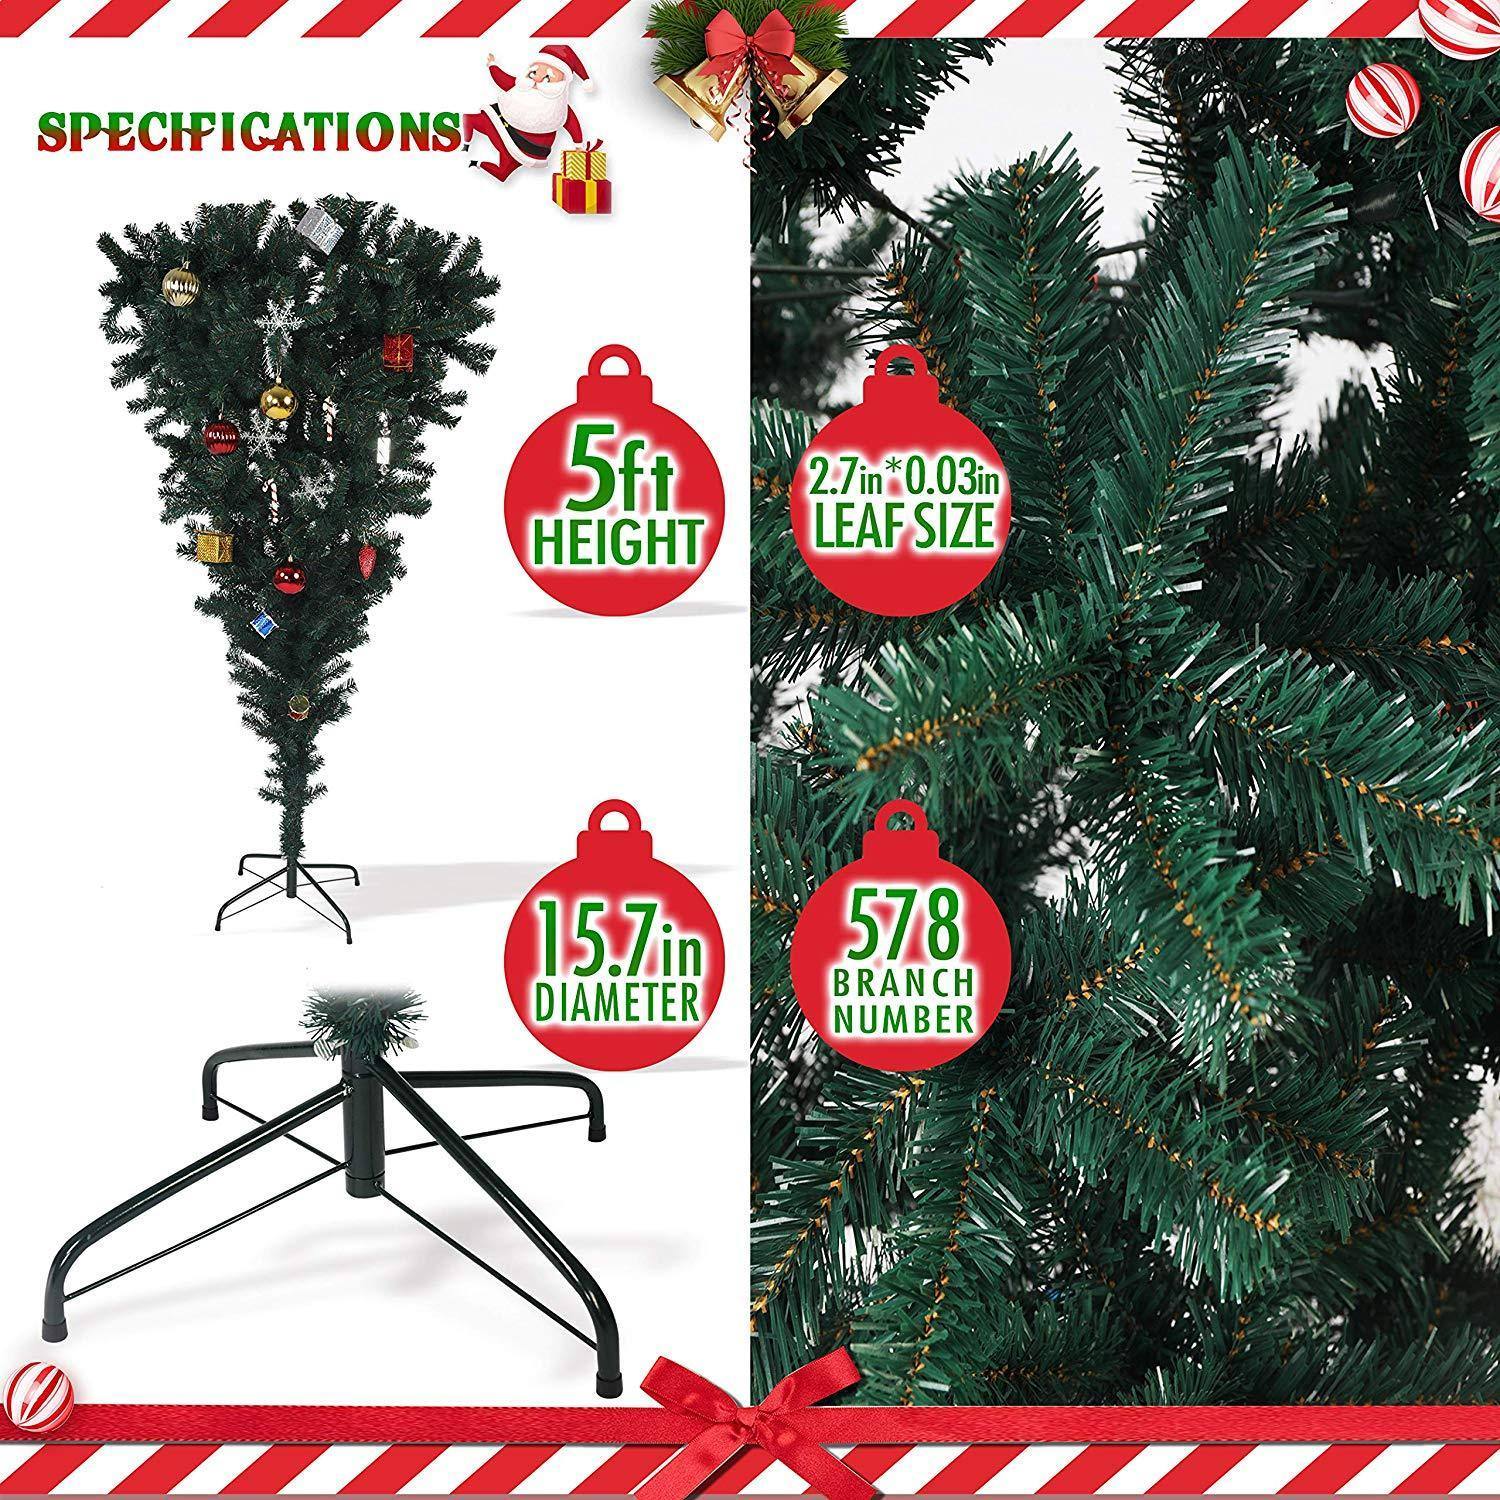 5 Ft Upsidedown Premium Artificial Christmas Tree with Solid Metal Stand, Festive Indoor and Outdoor Decoration